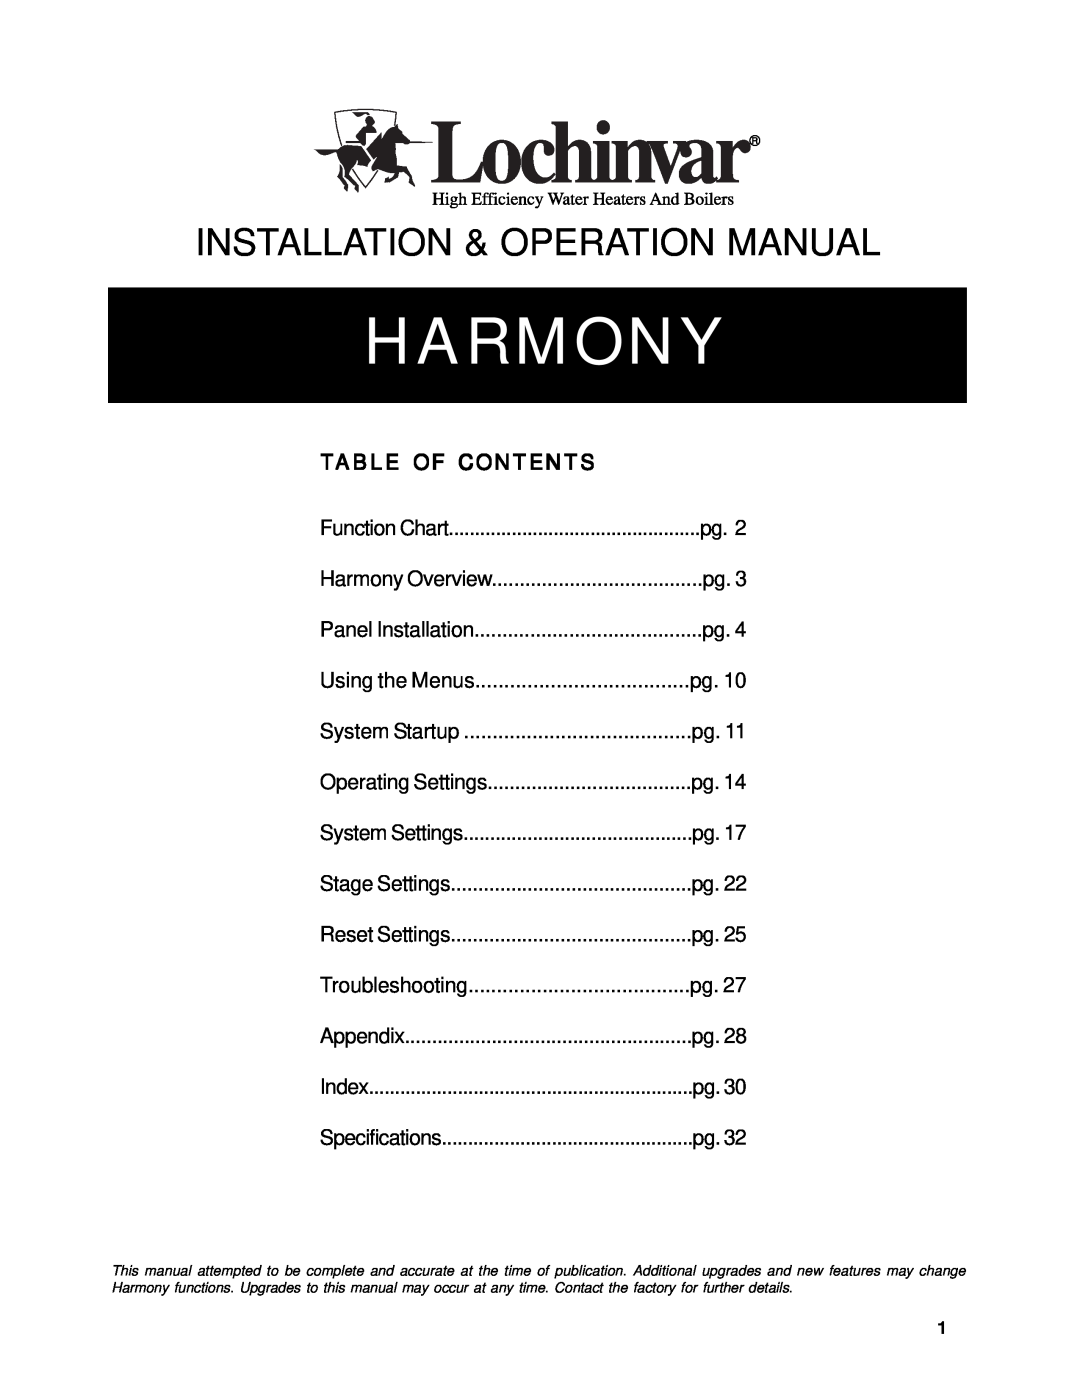 Lochinvar Harmony operation manual Table Of Contents, Lochinvar 